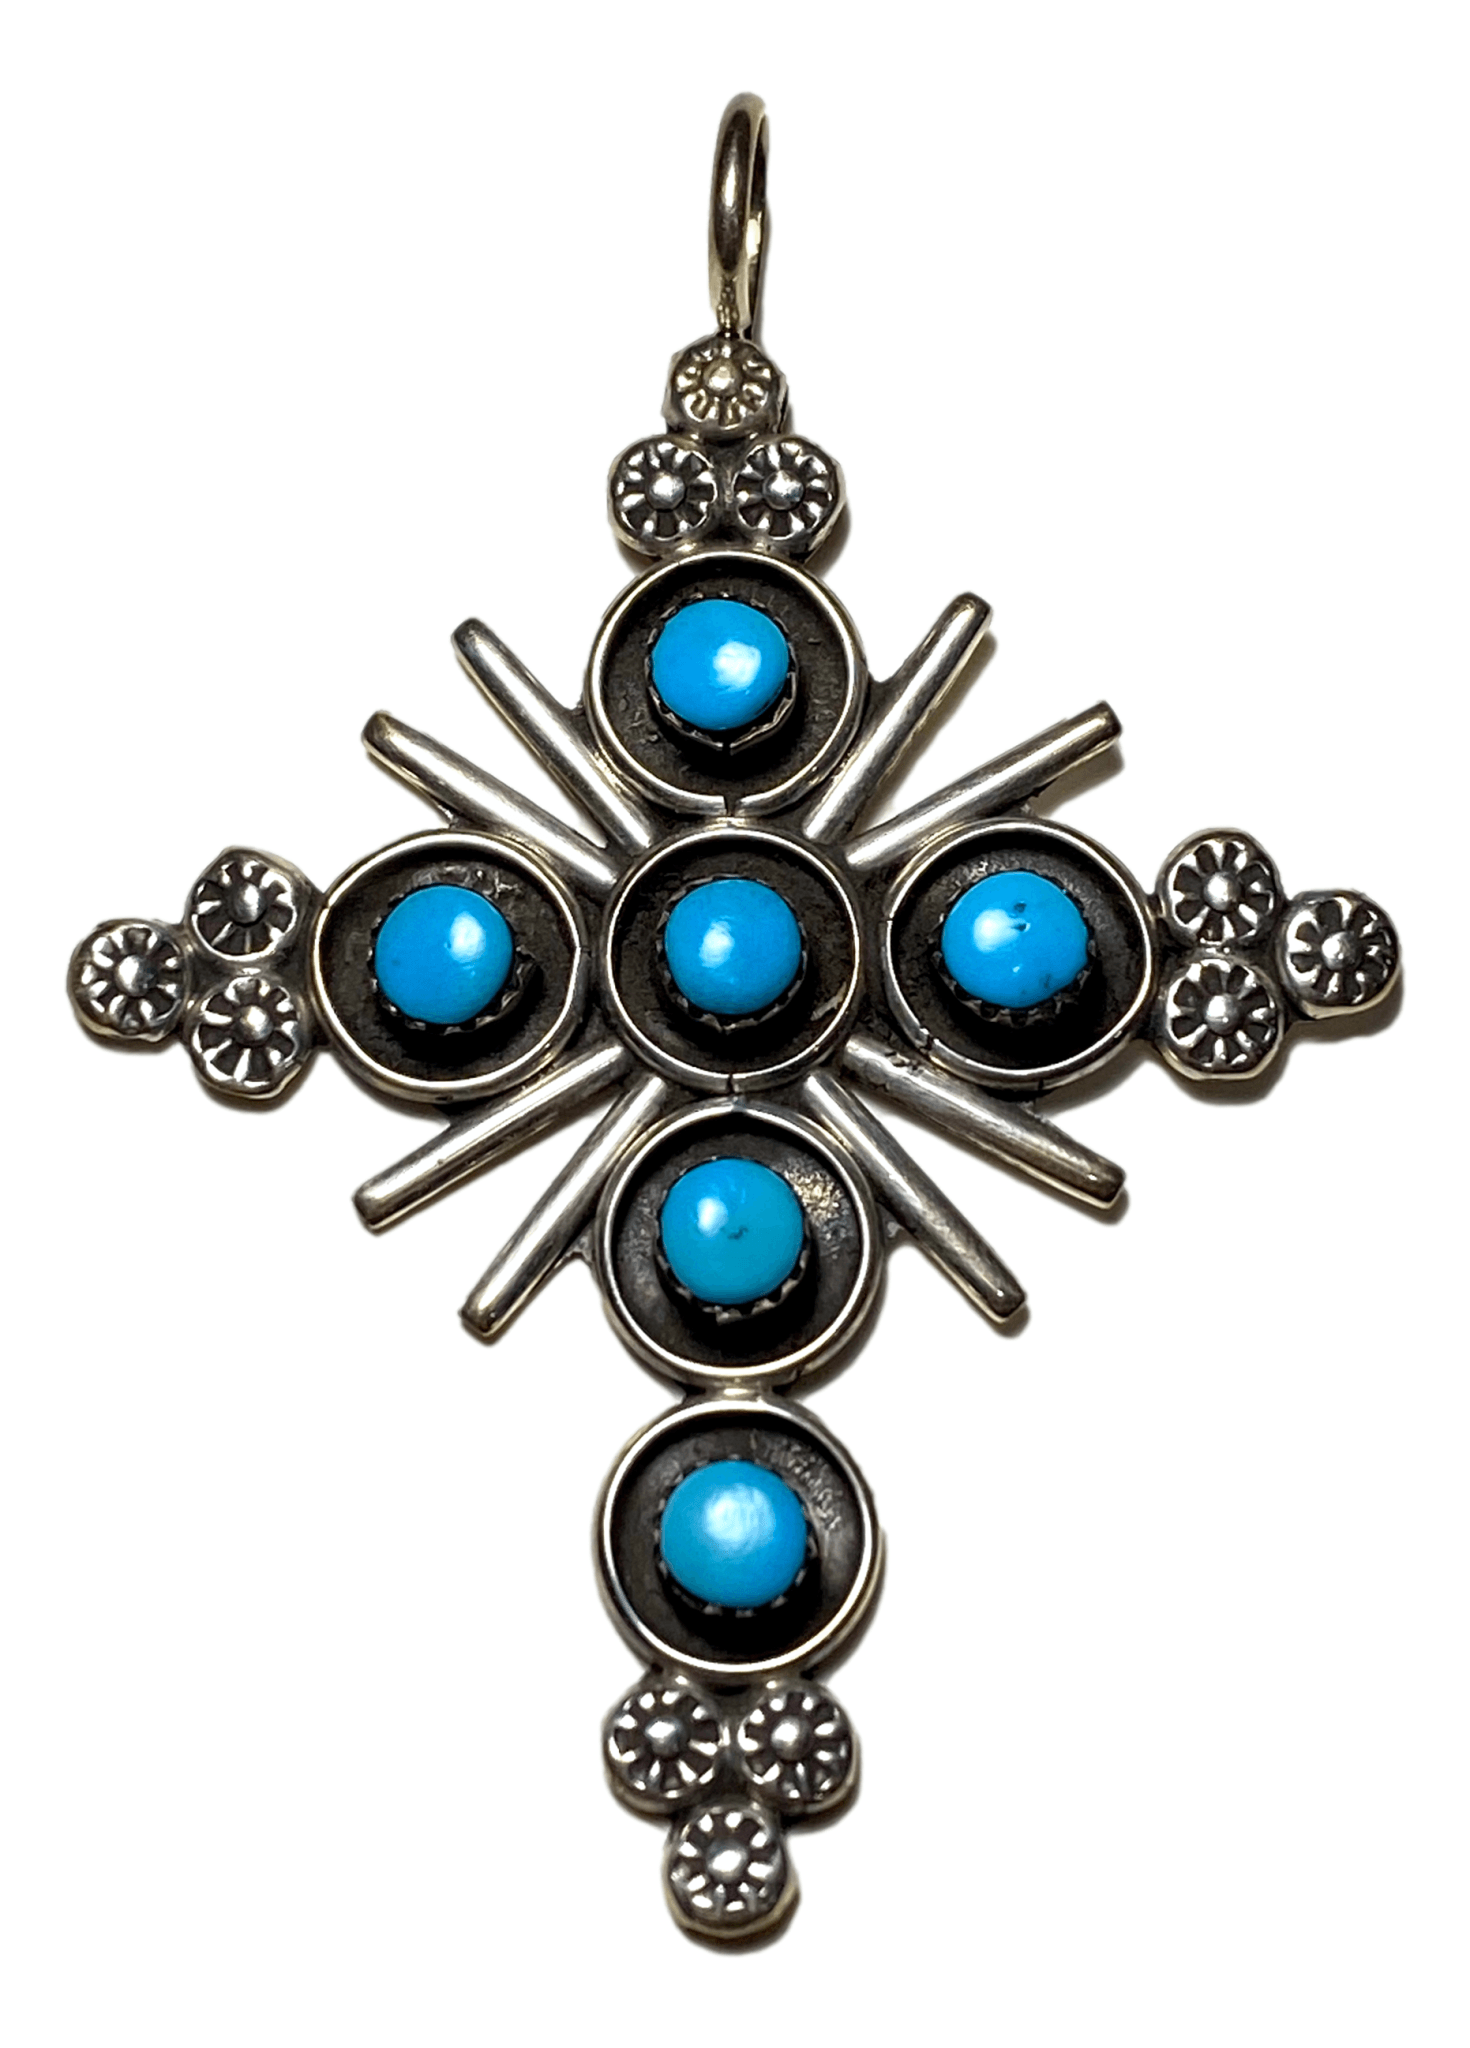 Pendant Cross Sterling Silver 6 Count Turquoise Stone Concho Trinity Edge Sunburst Design Handcrafted by New Mexico Artisan 3 L x 2 W inches - Ysleta Mission Gift Shop- VOTED El Paso's Best Gift Shop